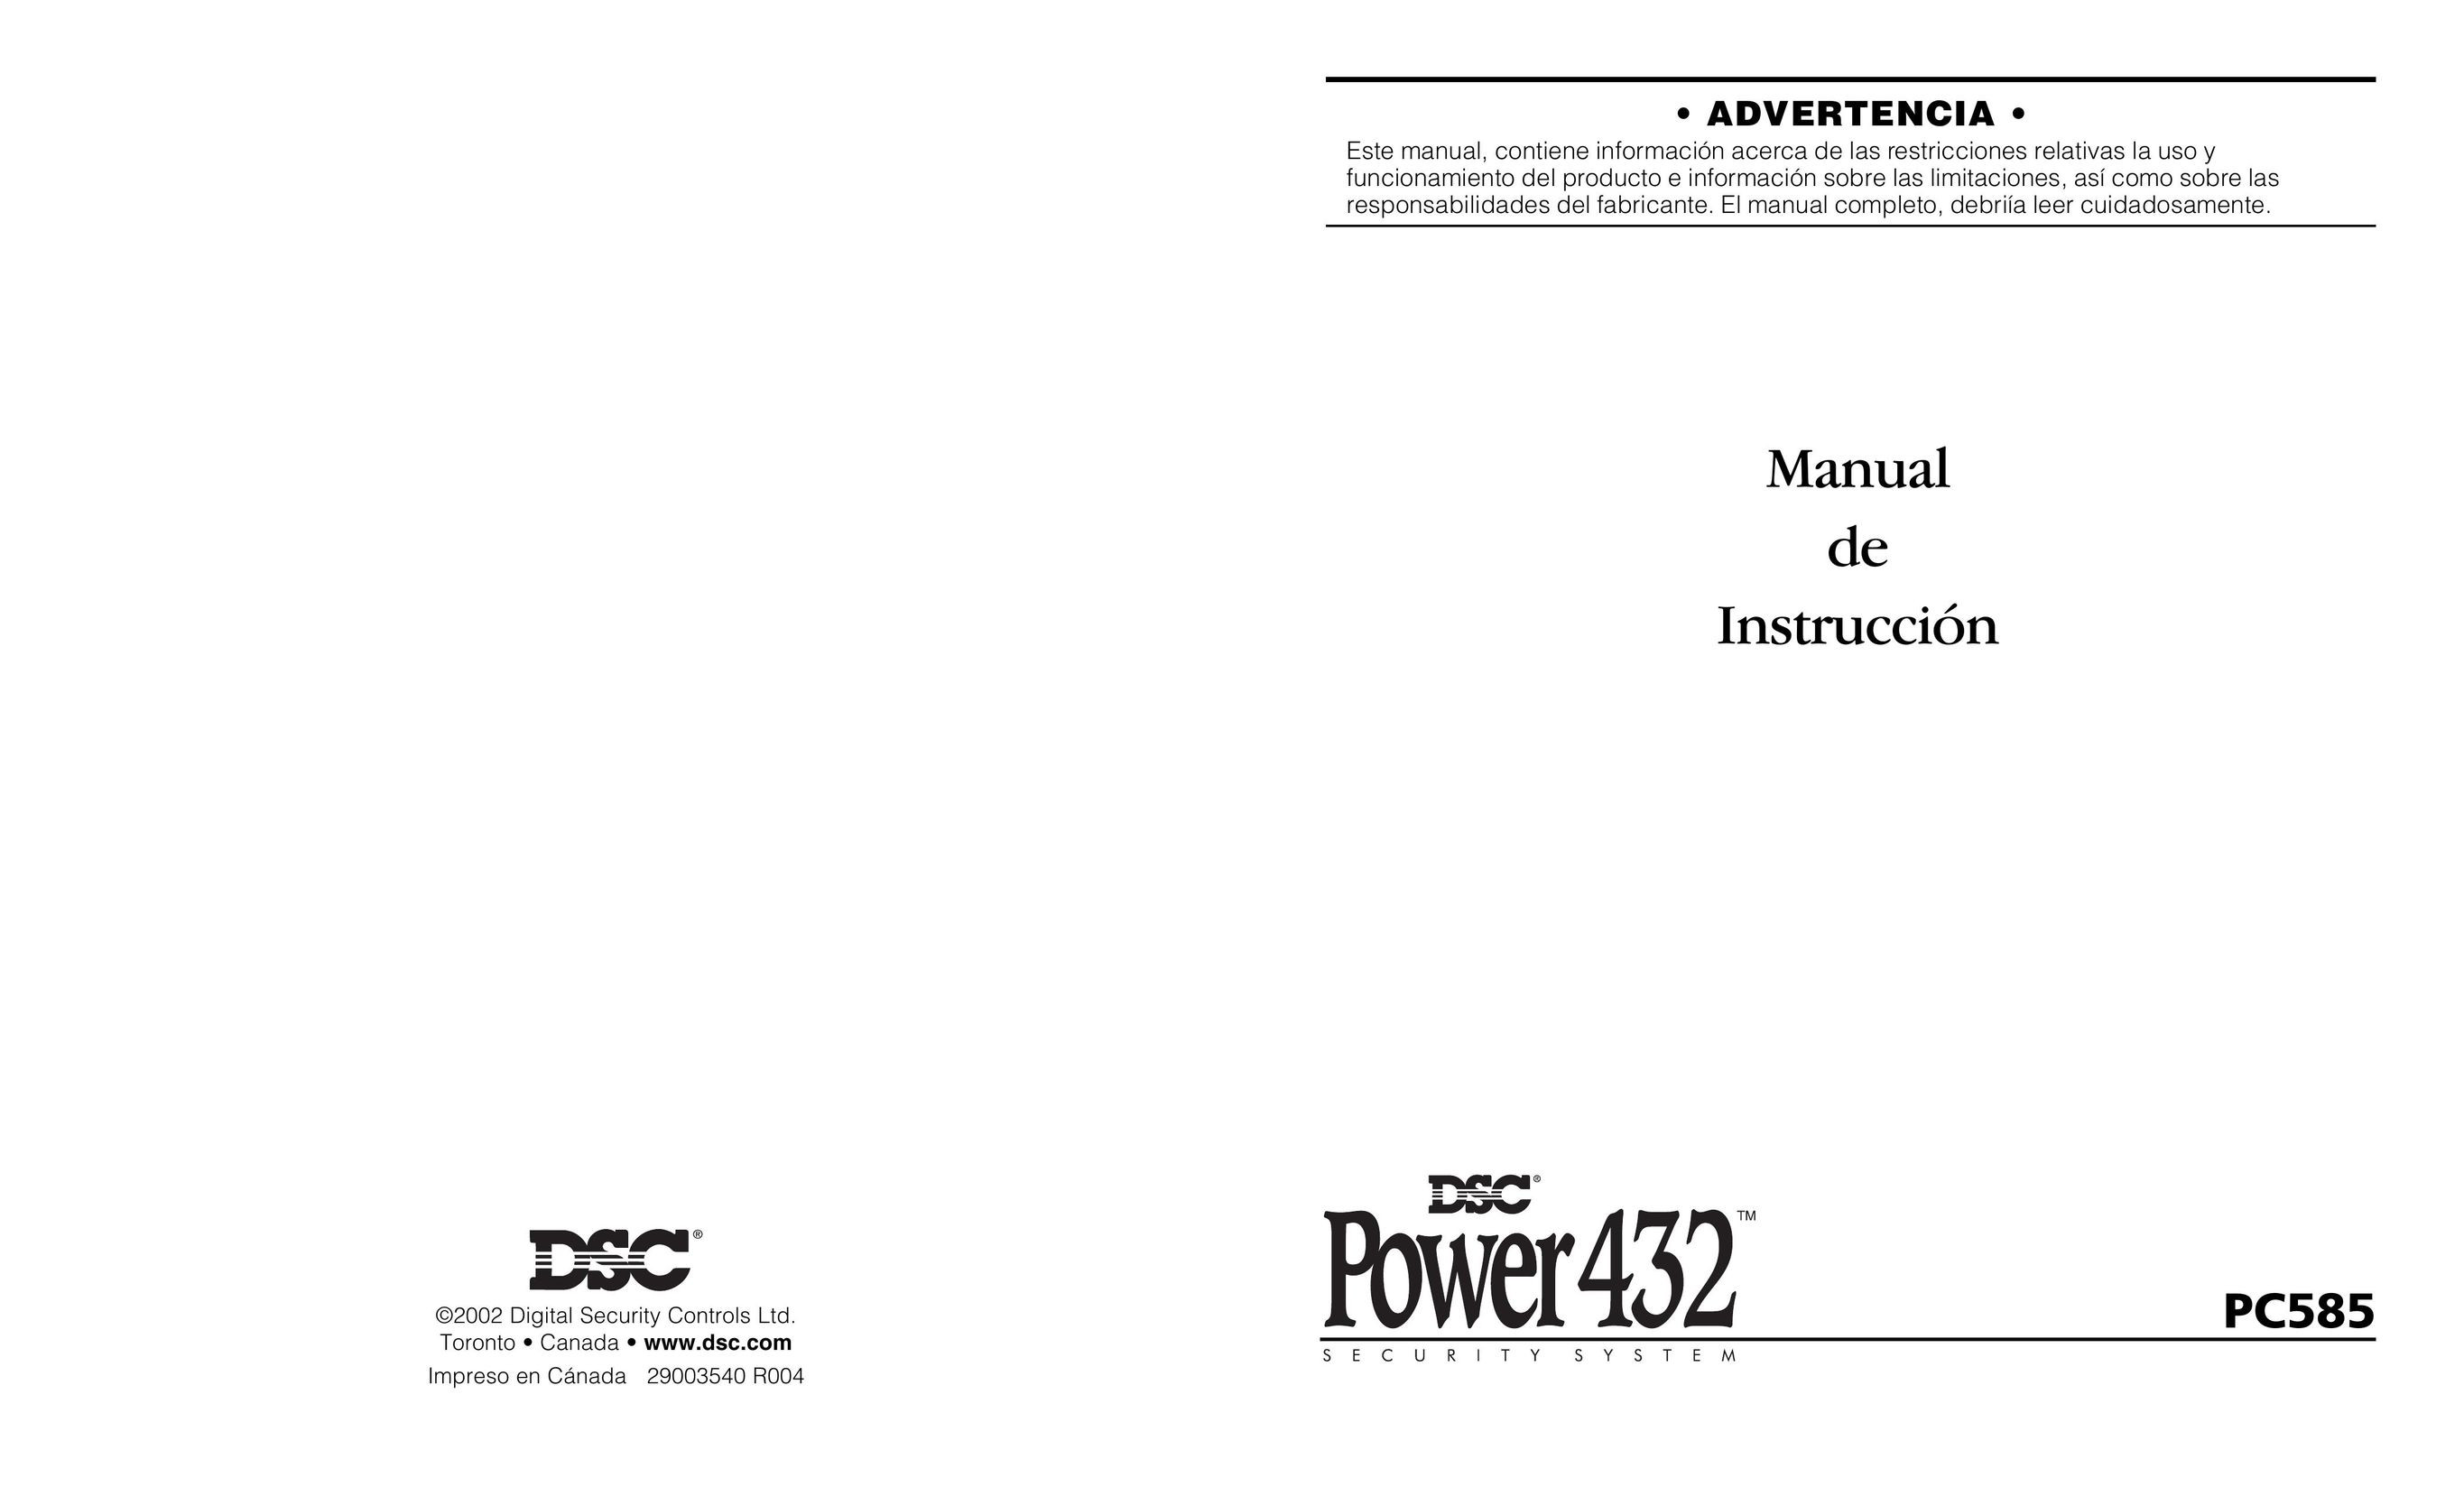 Delkin Devices PC585 Home Security System User Manual